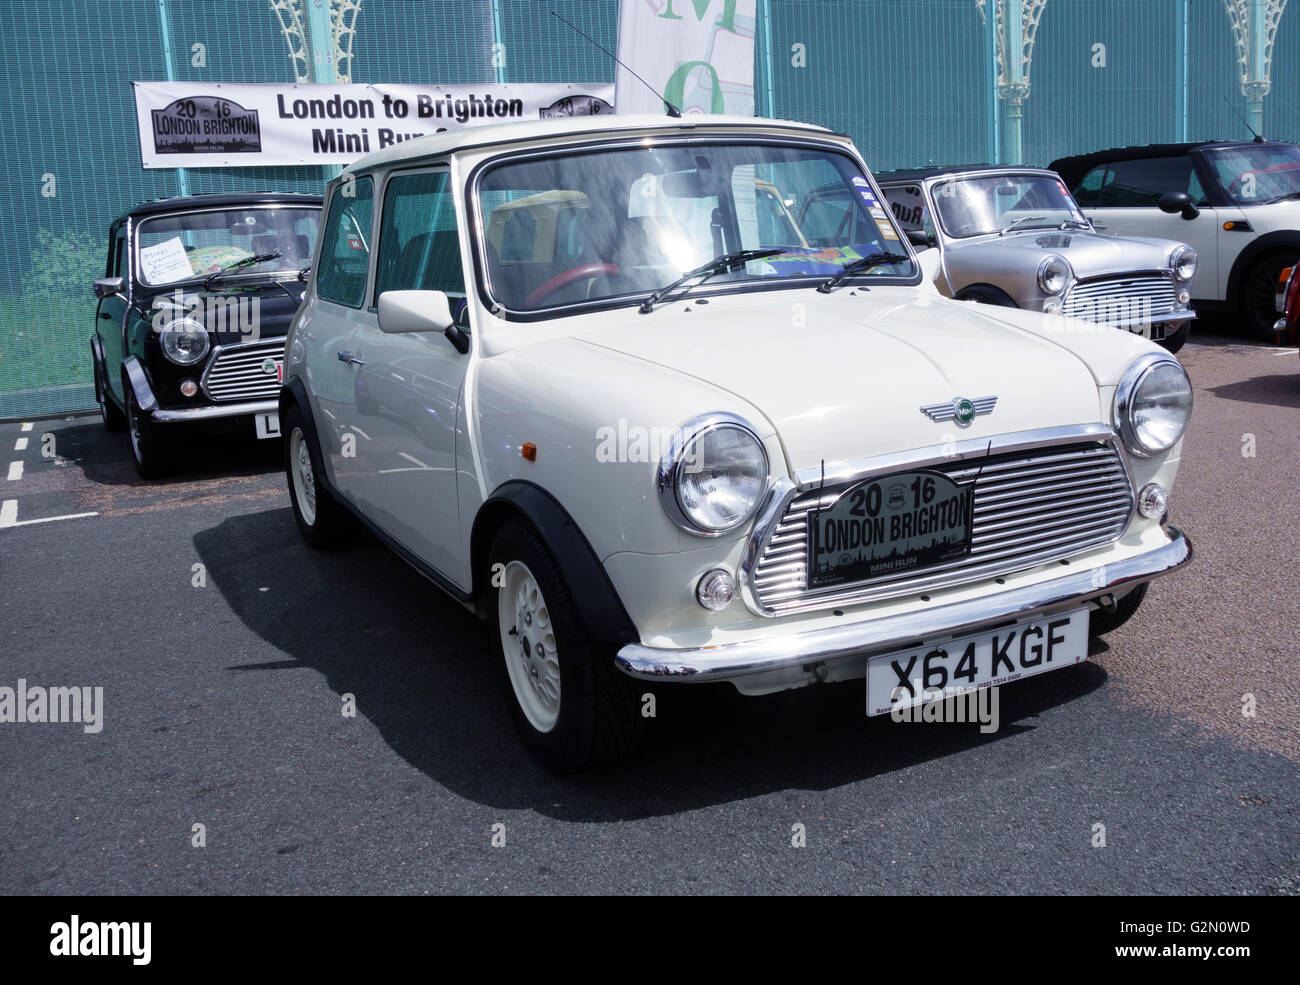 Rover Mini Seven 2 door saloon (2000) on display in Madeira Drive after completing 2016 London-Brighton Mini run. Stock Photo